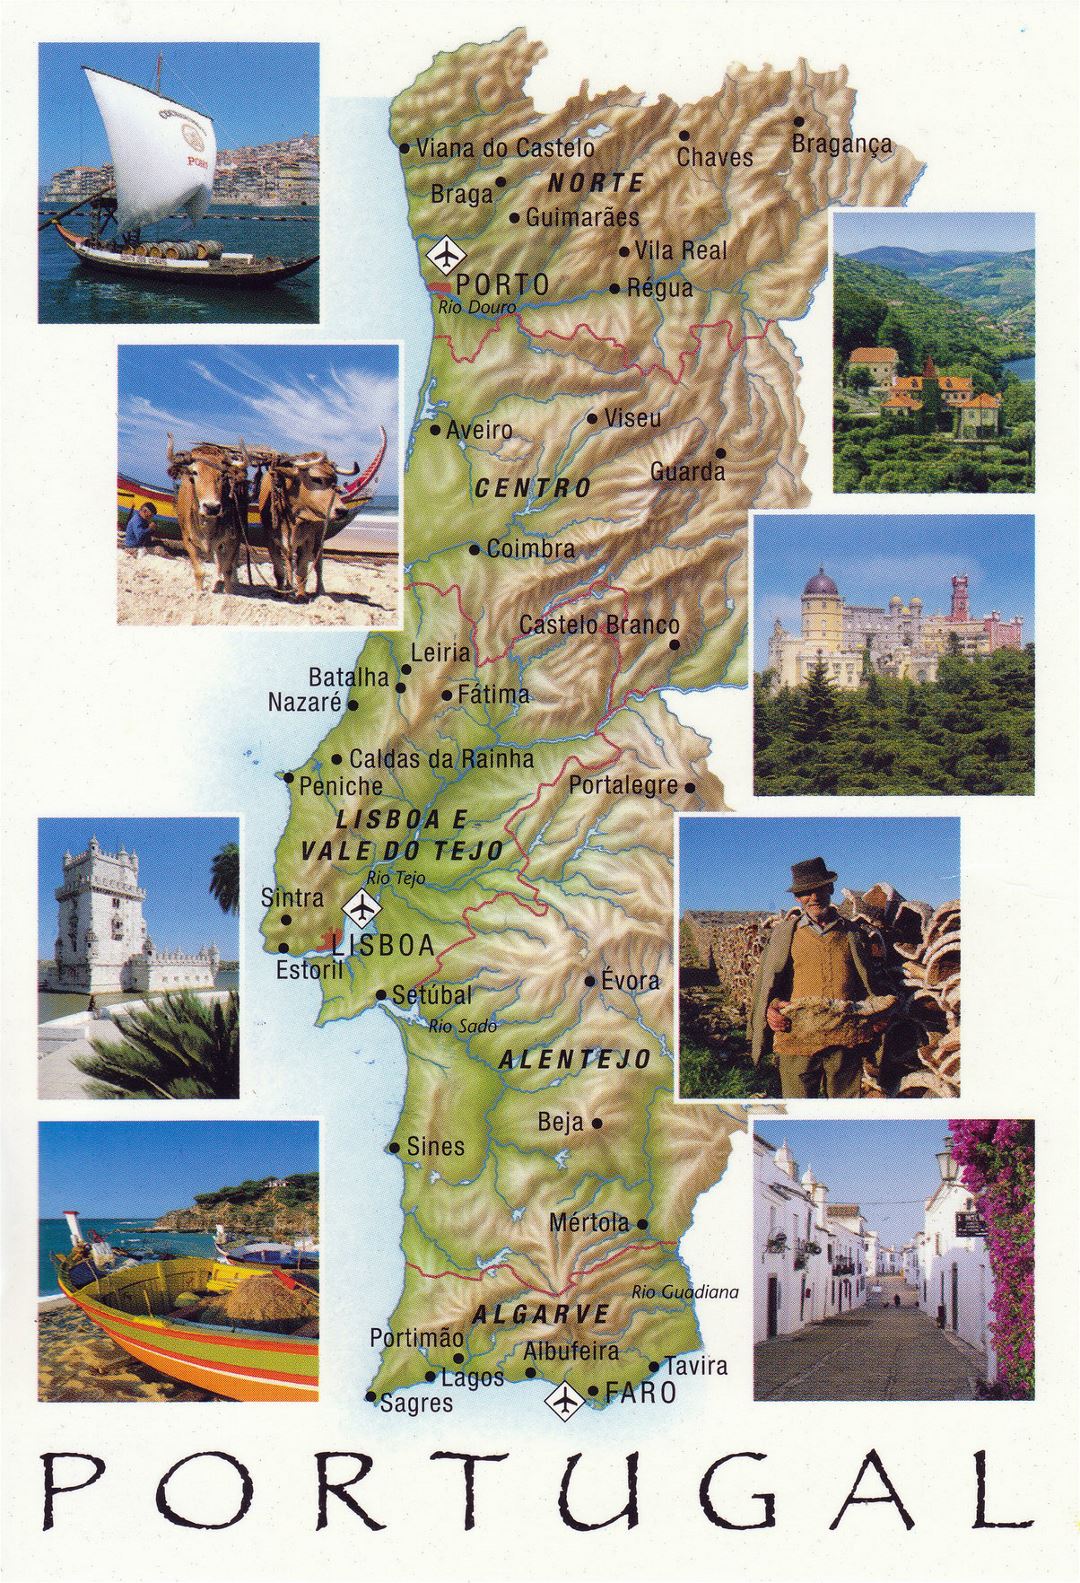 Large tourist map of Portugal with relief, cities and airports